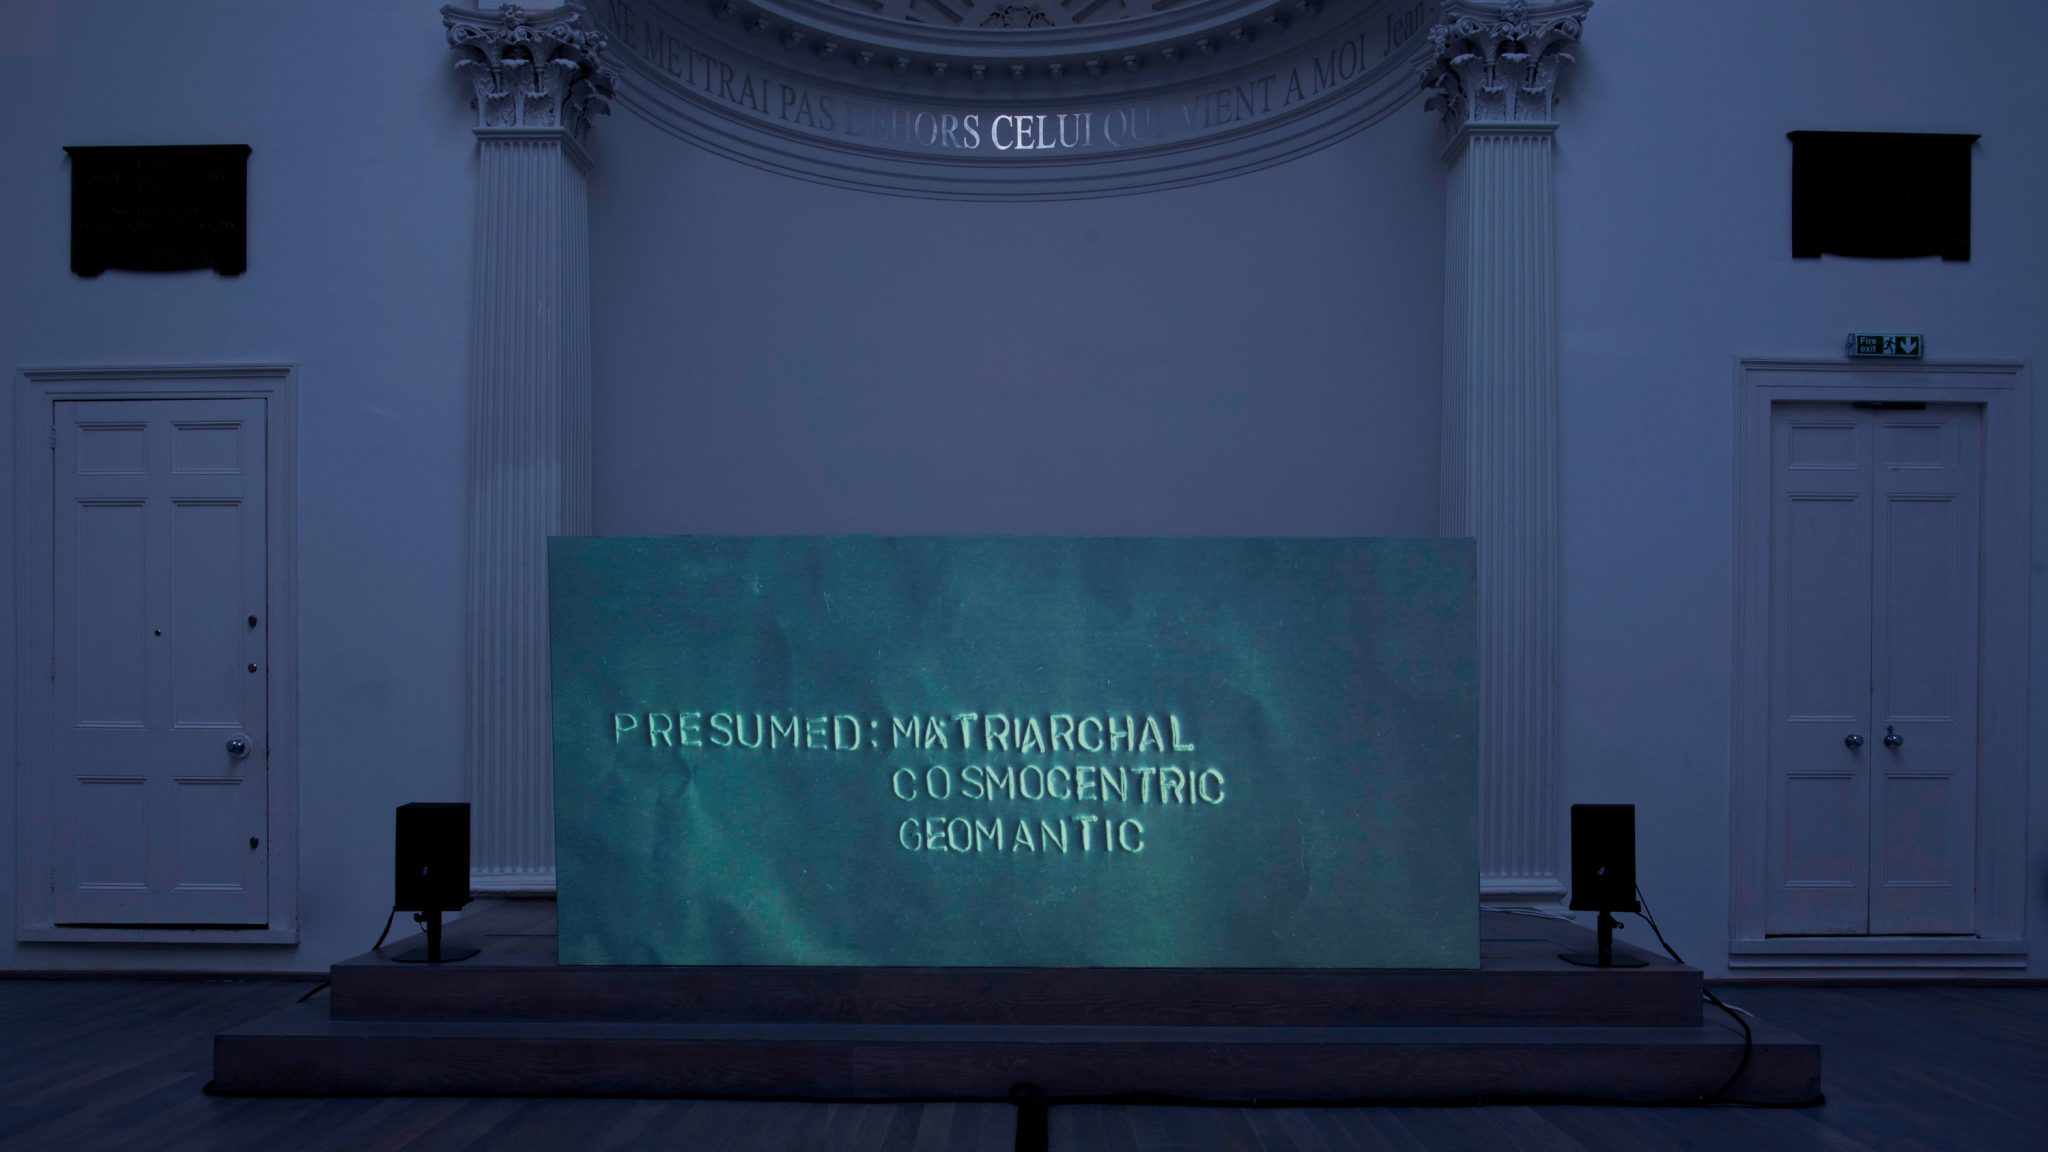 A screen in an old church hall reads "Presumed: Matriarchal, Cosmocentric, Geomantic."